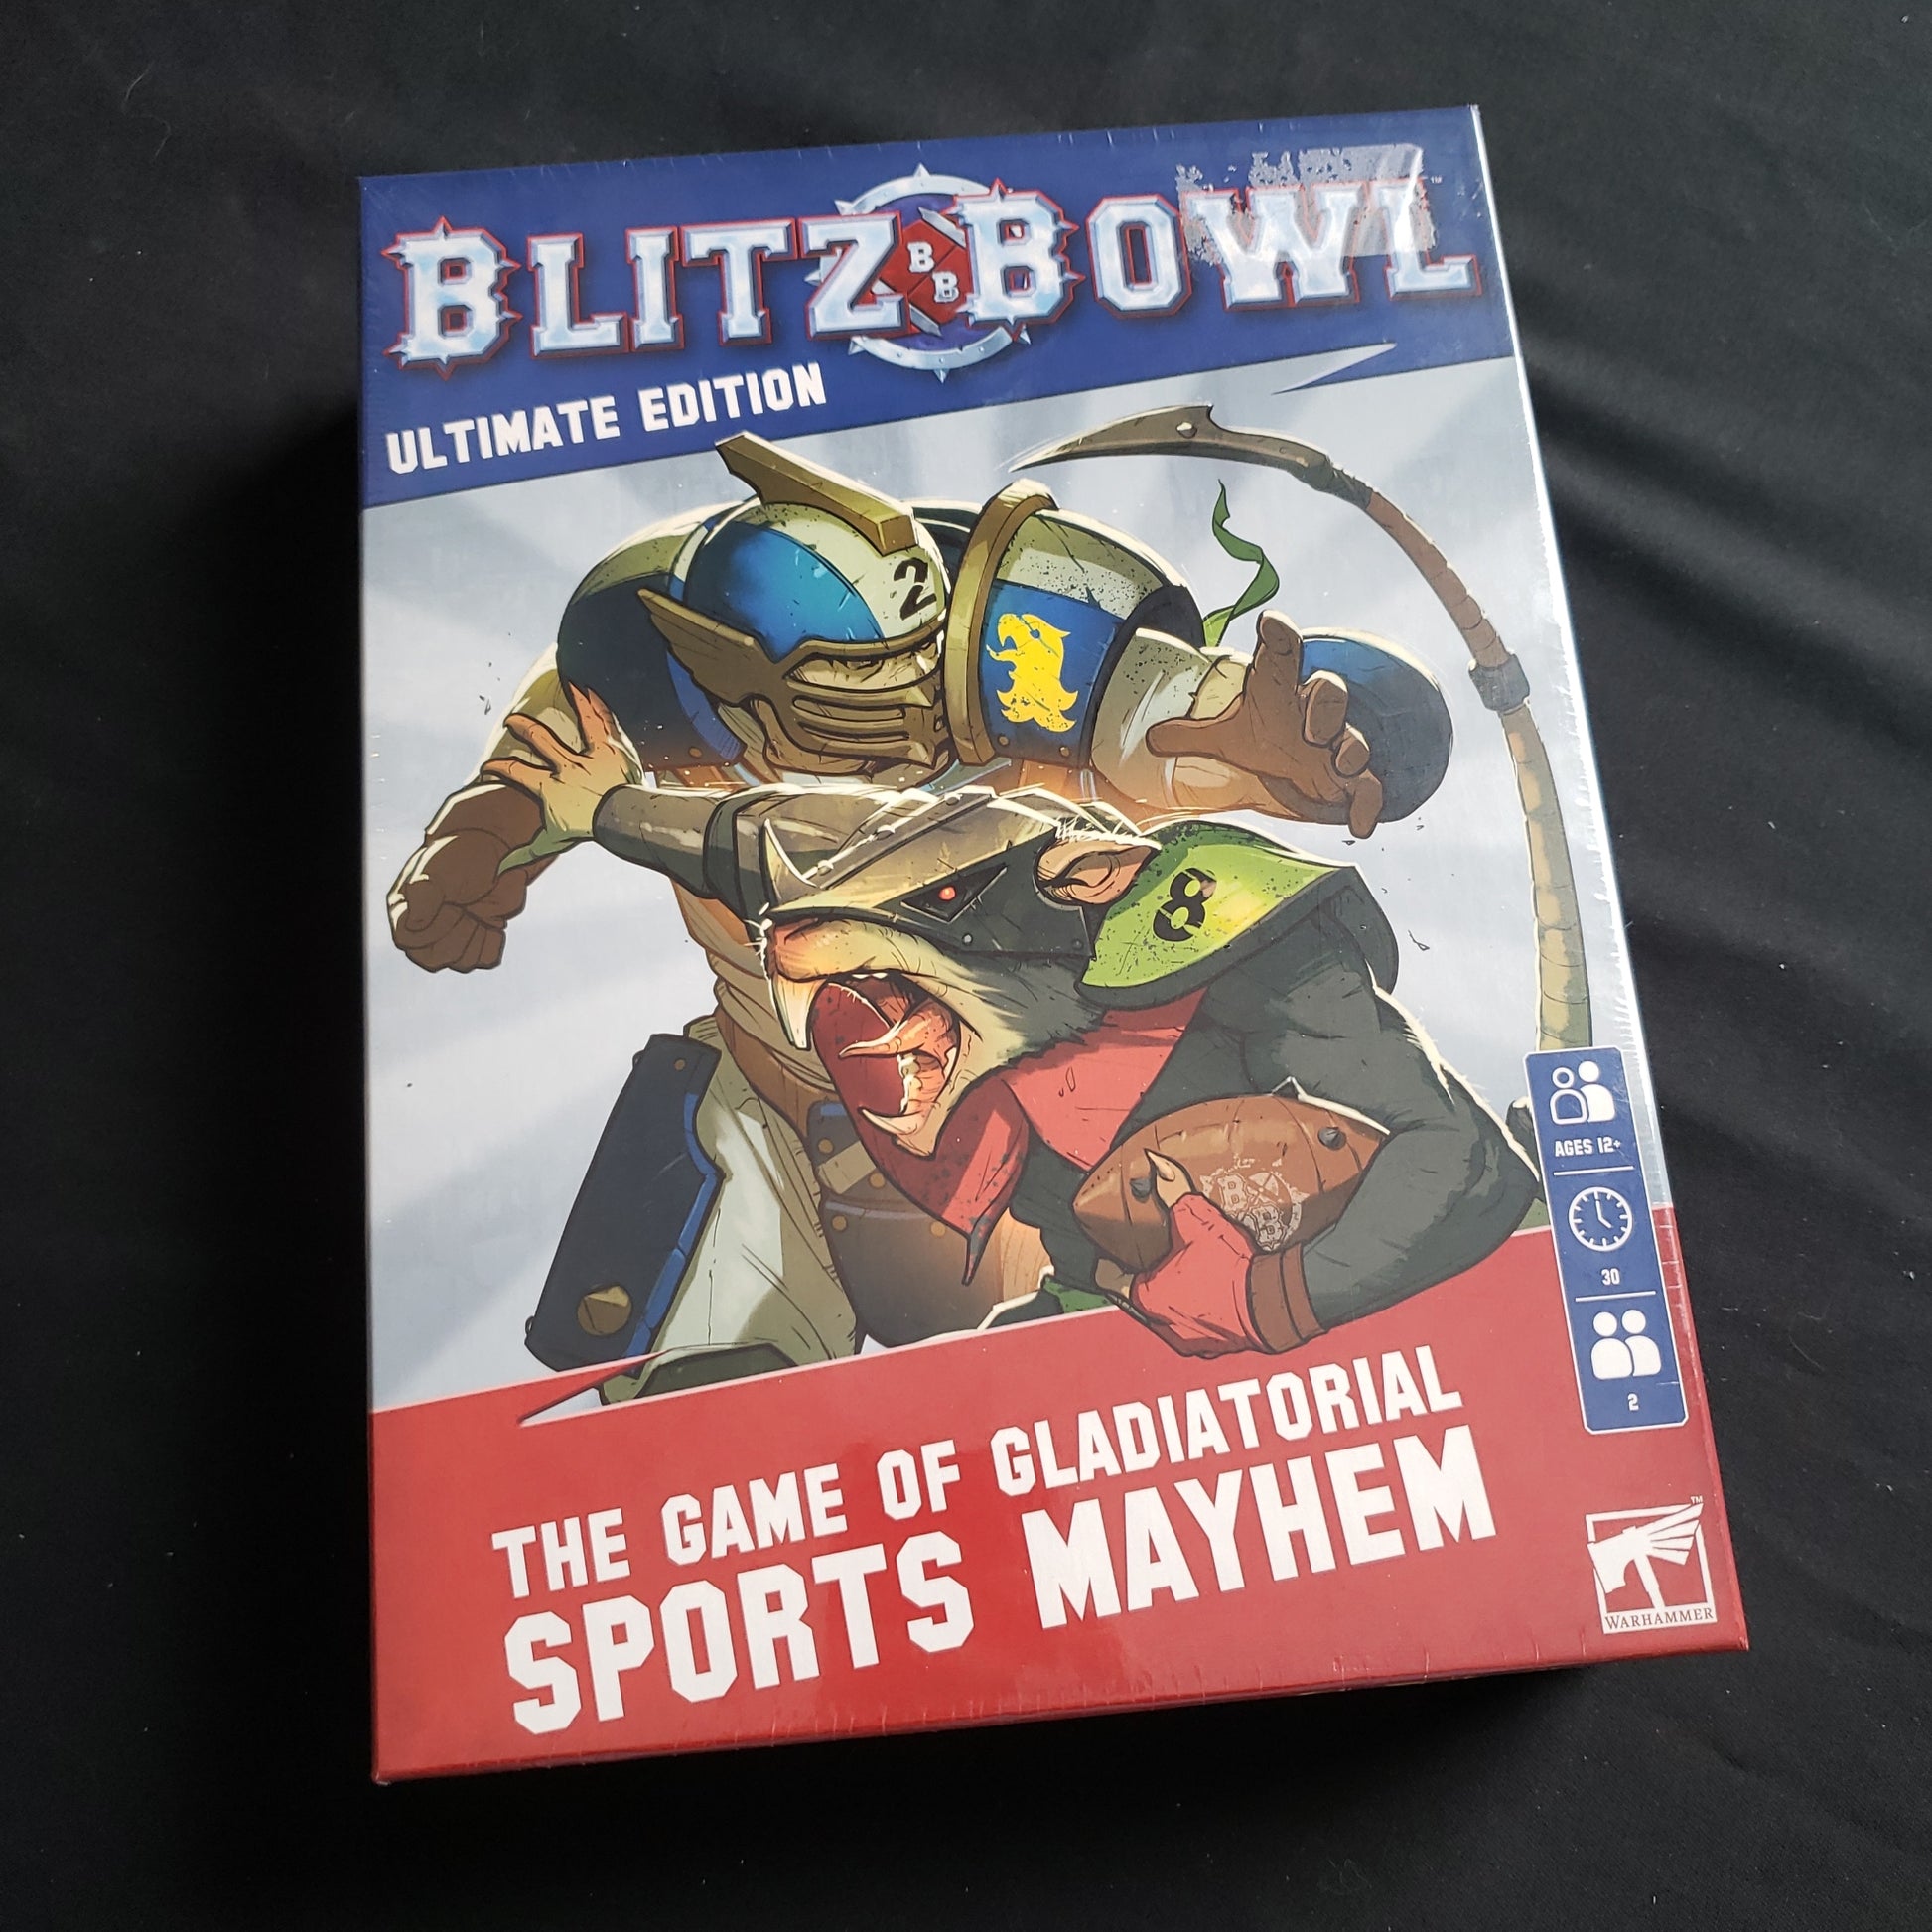 Image shows the front cover of the box of the Blitz Bowl: Ultimate Edition board game